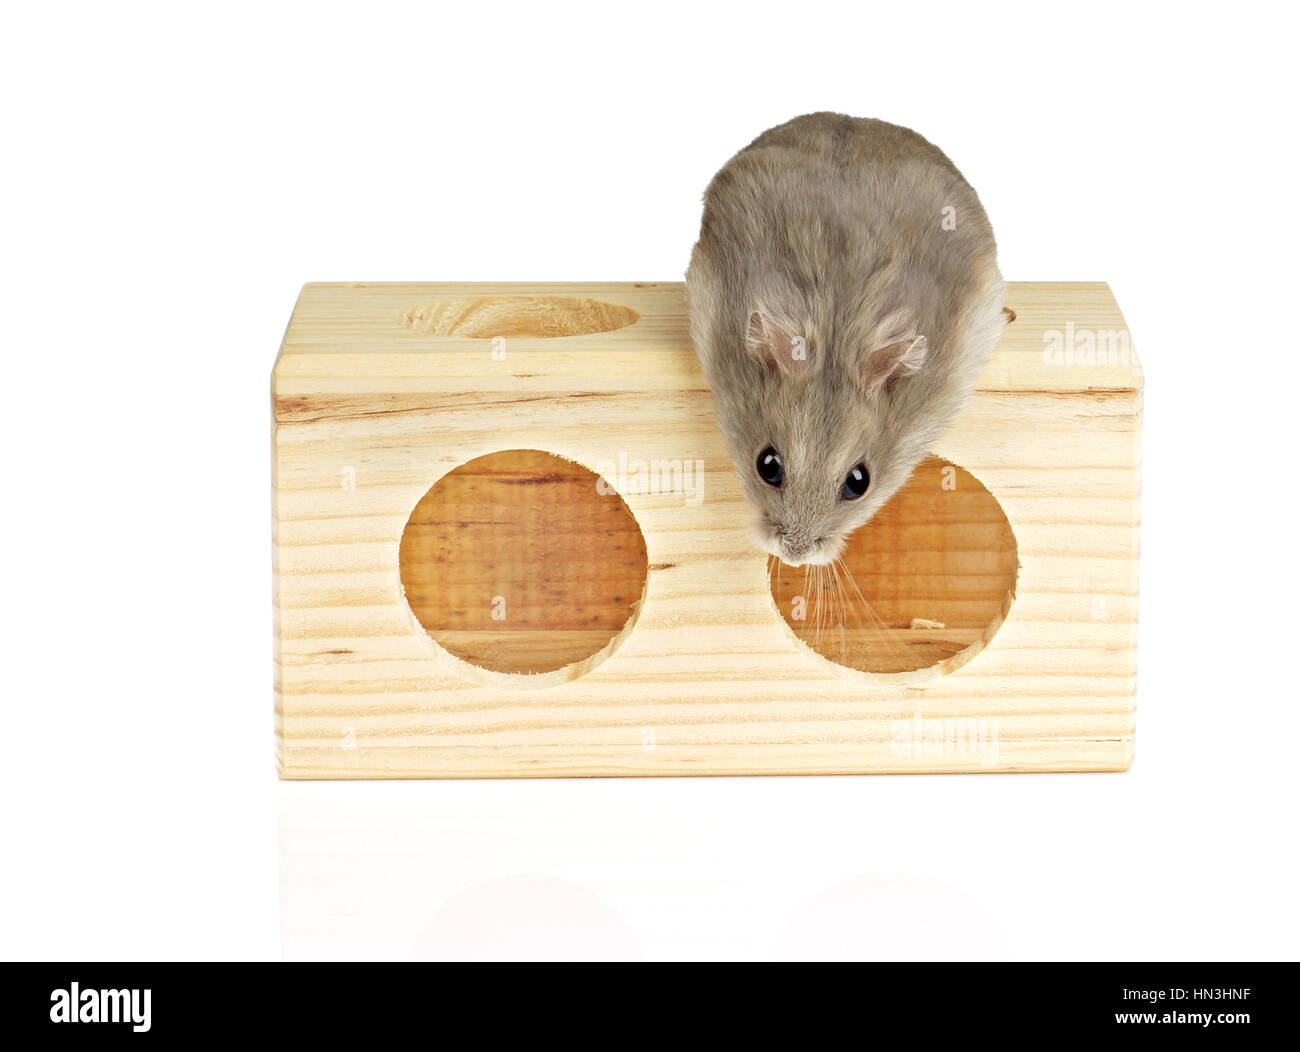 Dwarf Winter White Pet Hamster Sat on Wooden Block Isolated on White Bcakground Stock Photo